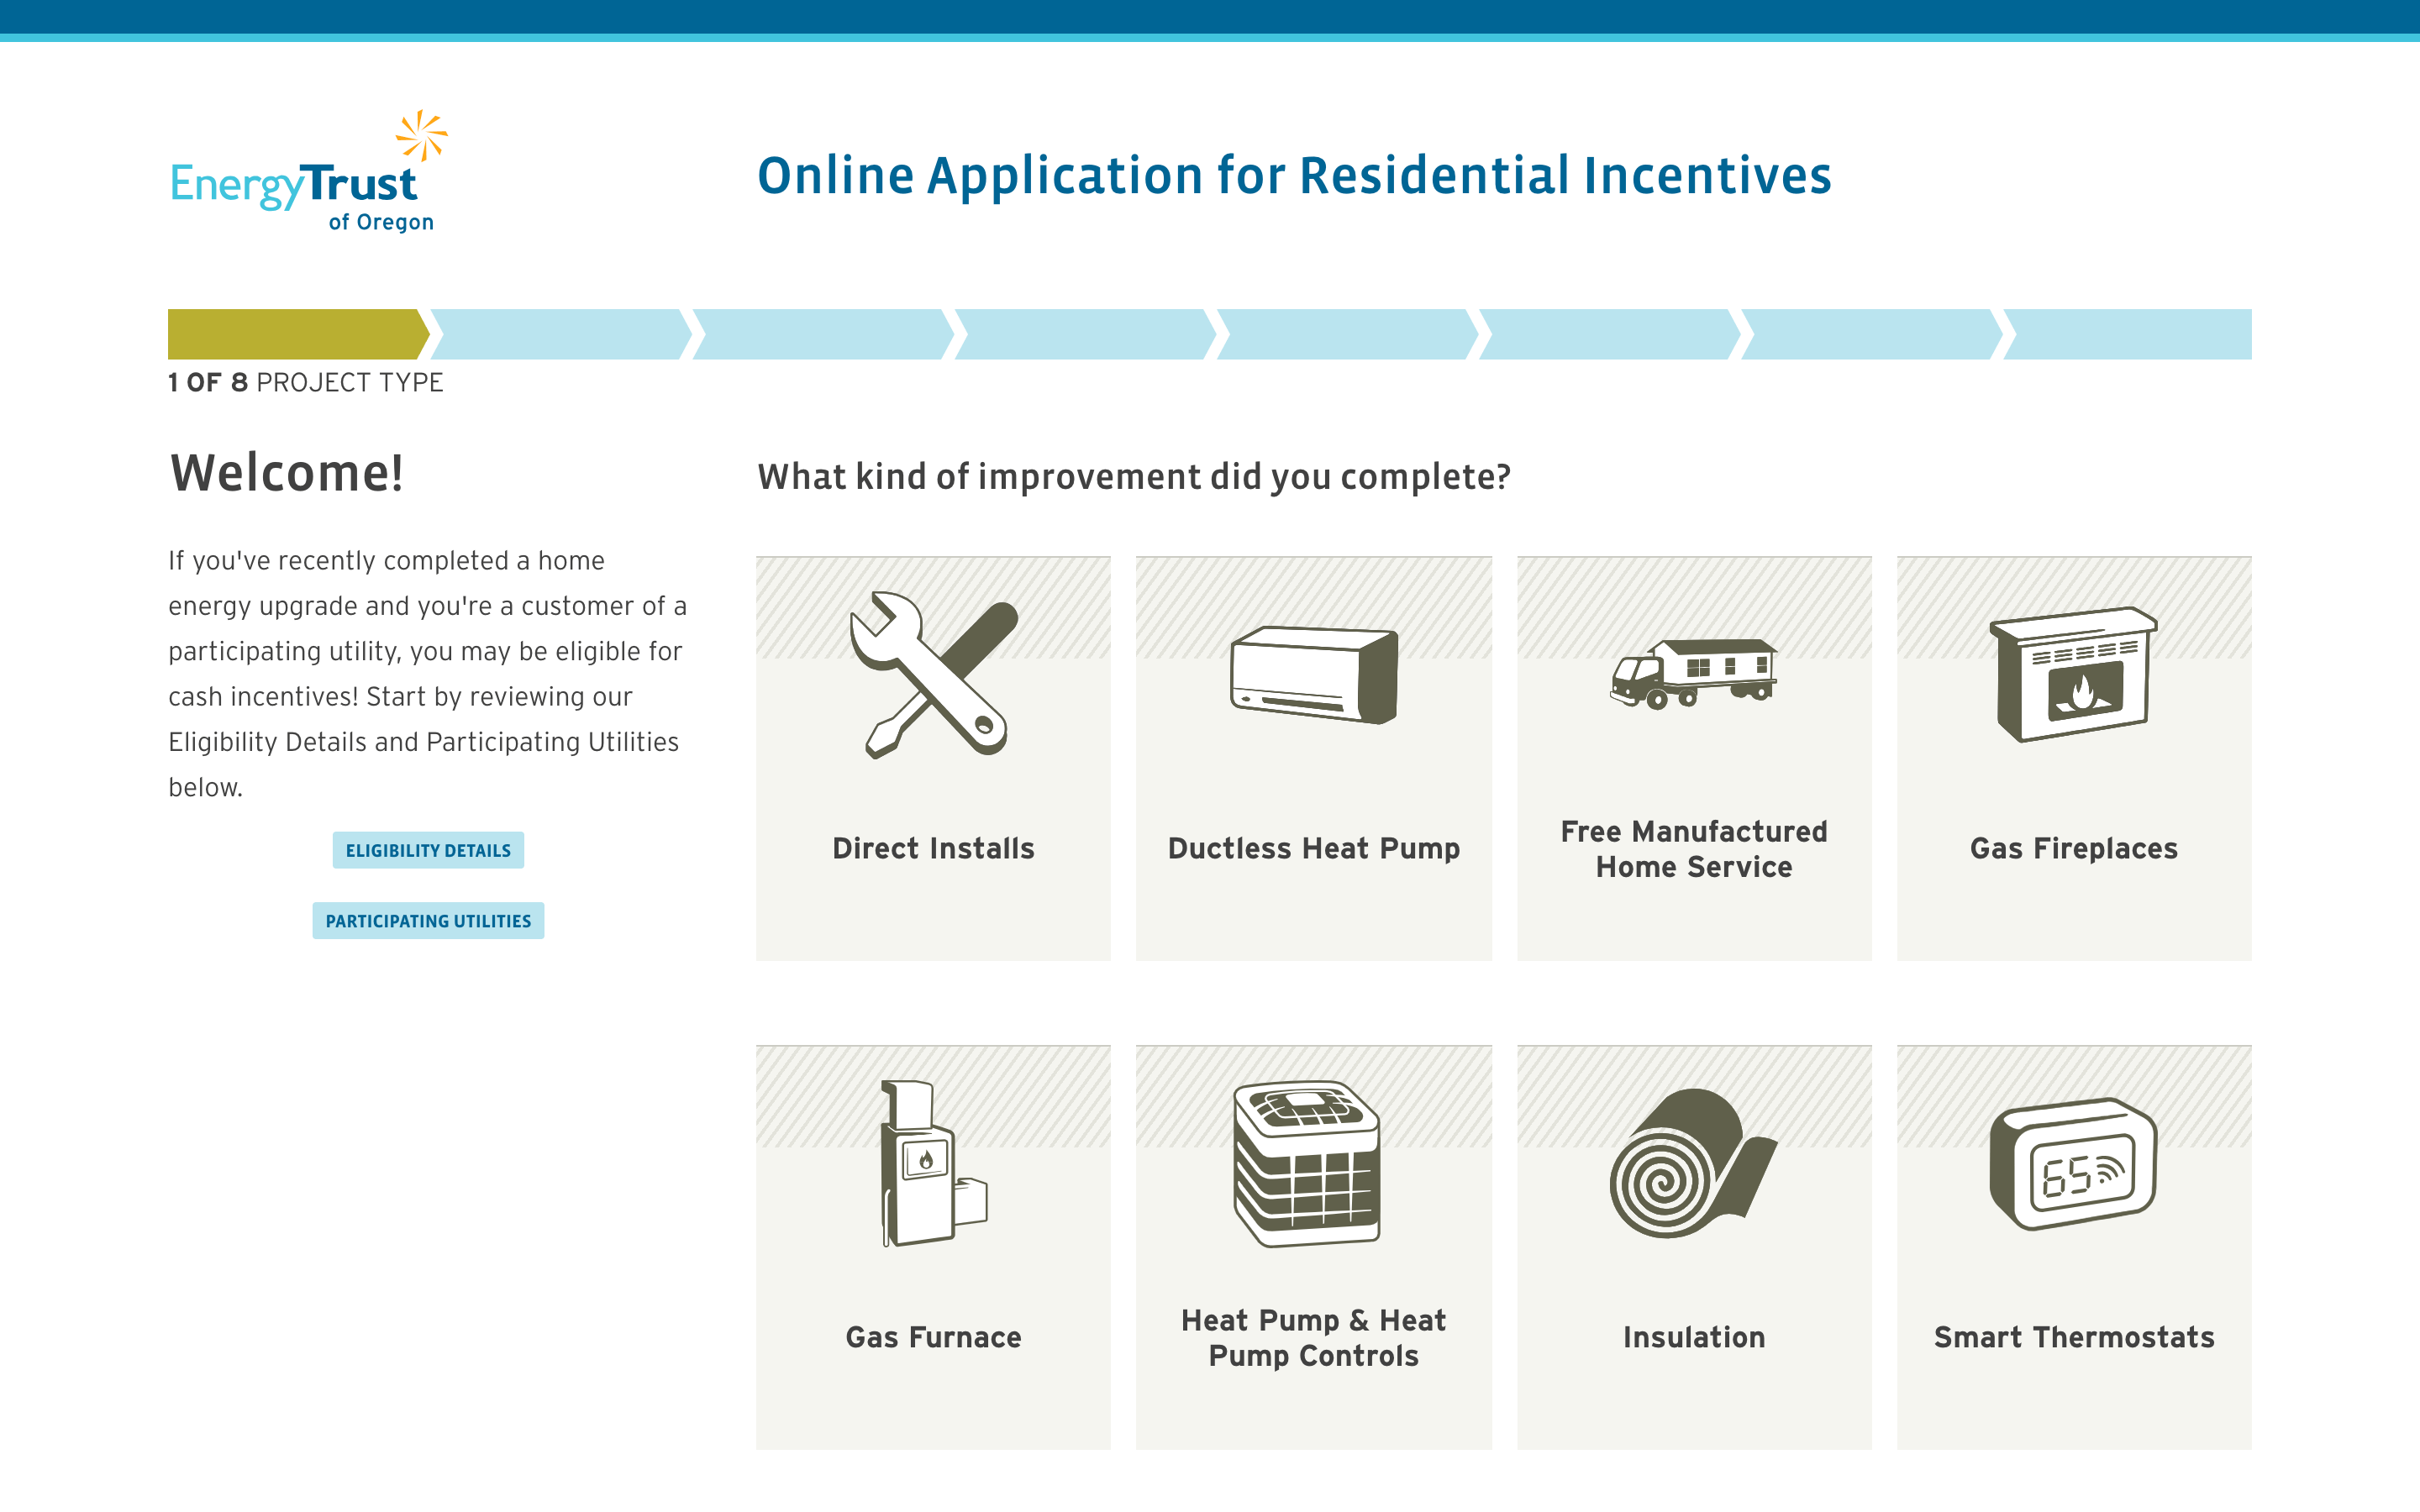 A screen capture of Energy Trust’s Online Application for Residential Incentives.